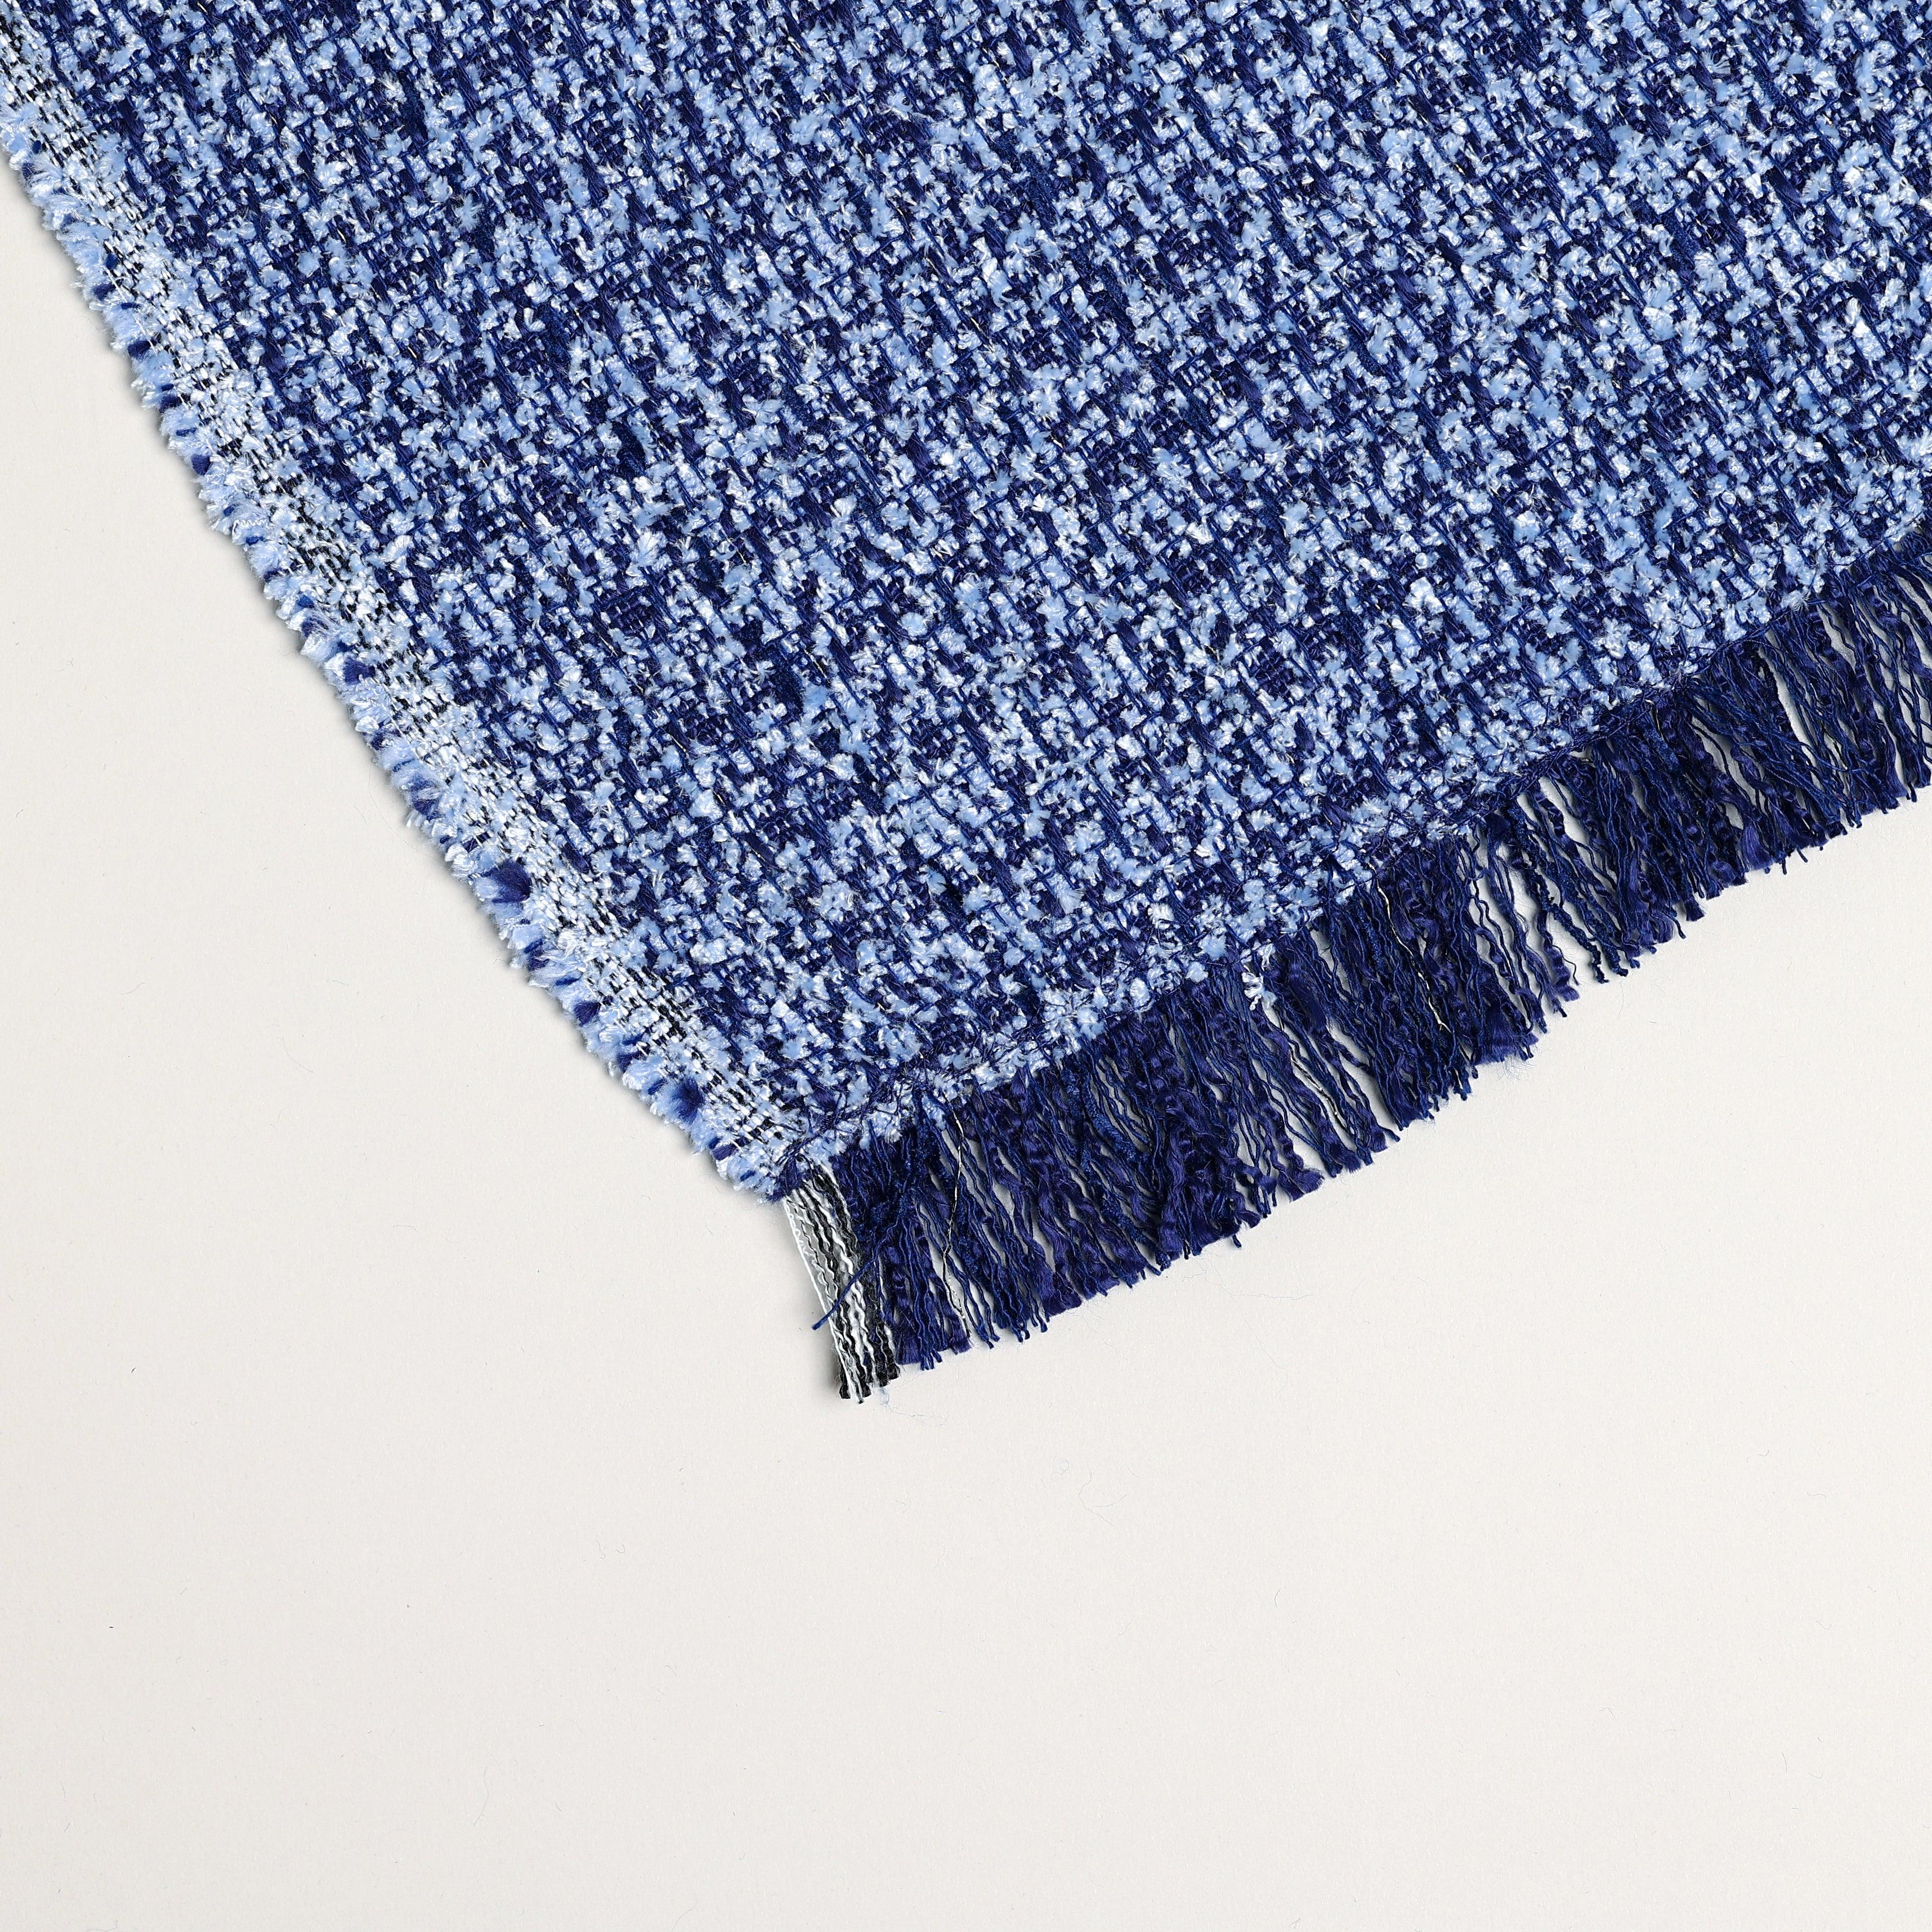 BLUE FUZZYTEXTURED CHENILLE FAUXE DENIM THROW BLANKET - Boucle Home